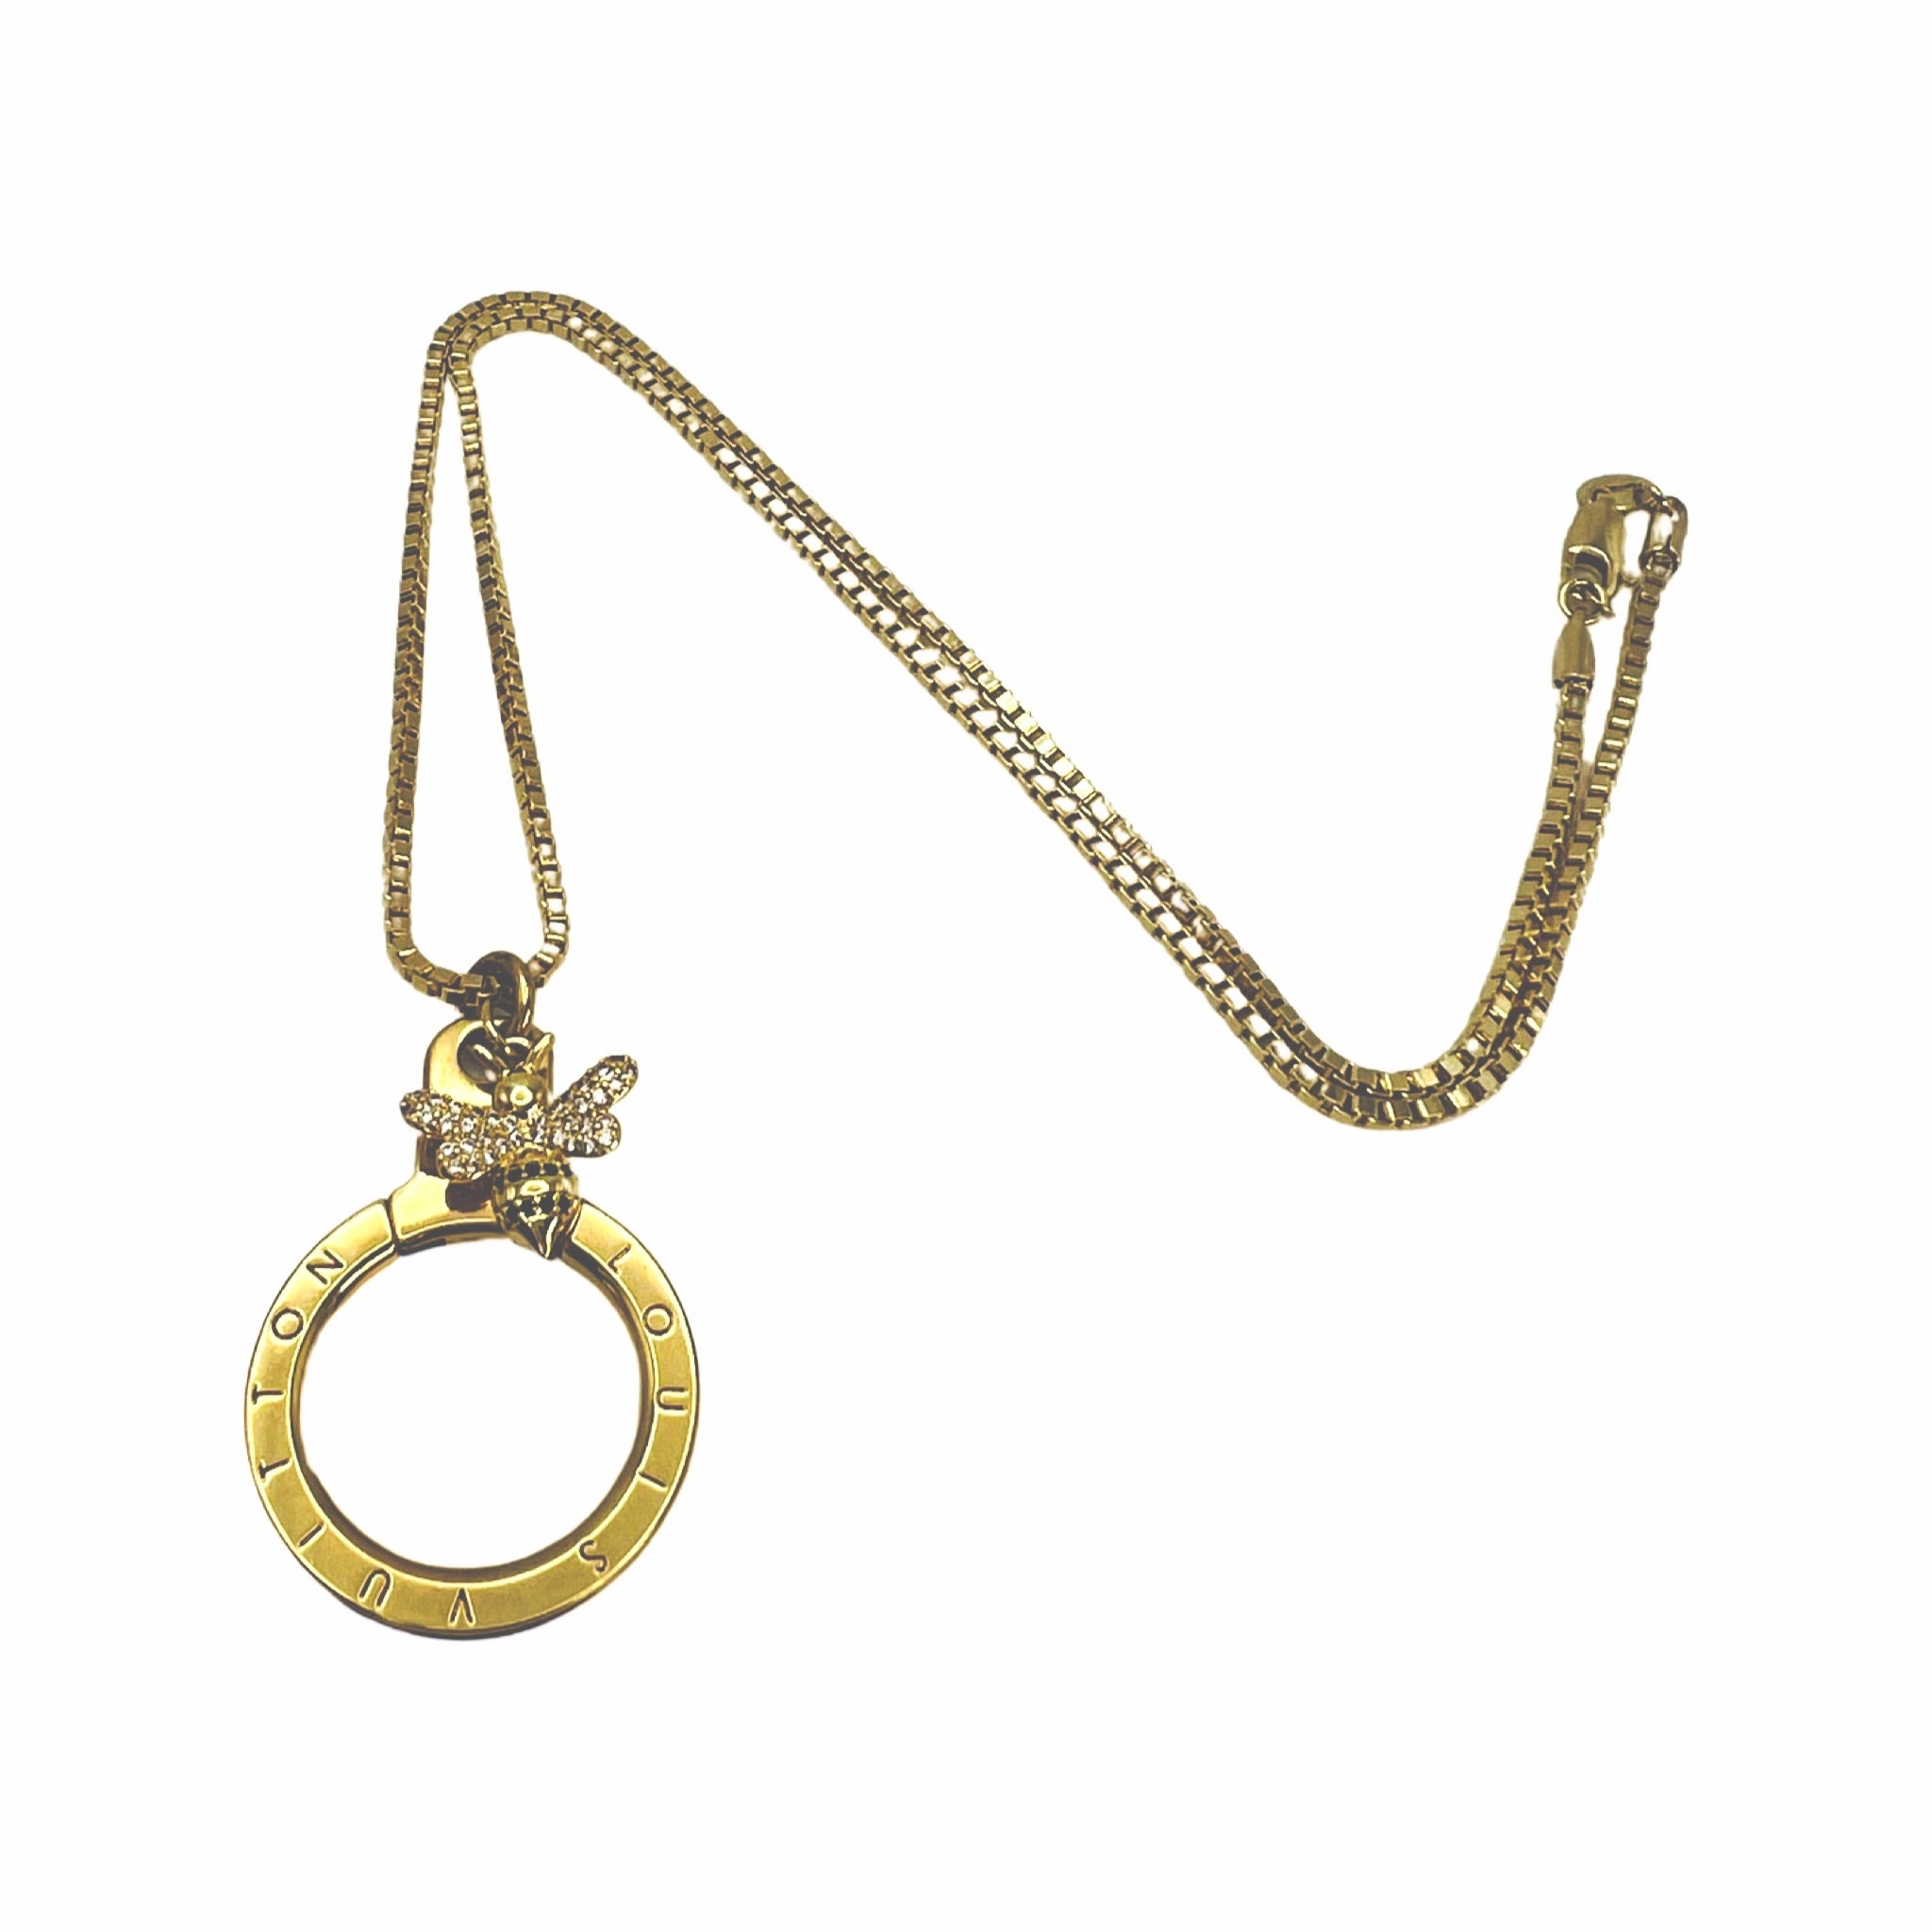 Repurposed LV Ring Charm With Butterfly Charm Necklace – LINA V DESIGNS